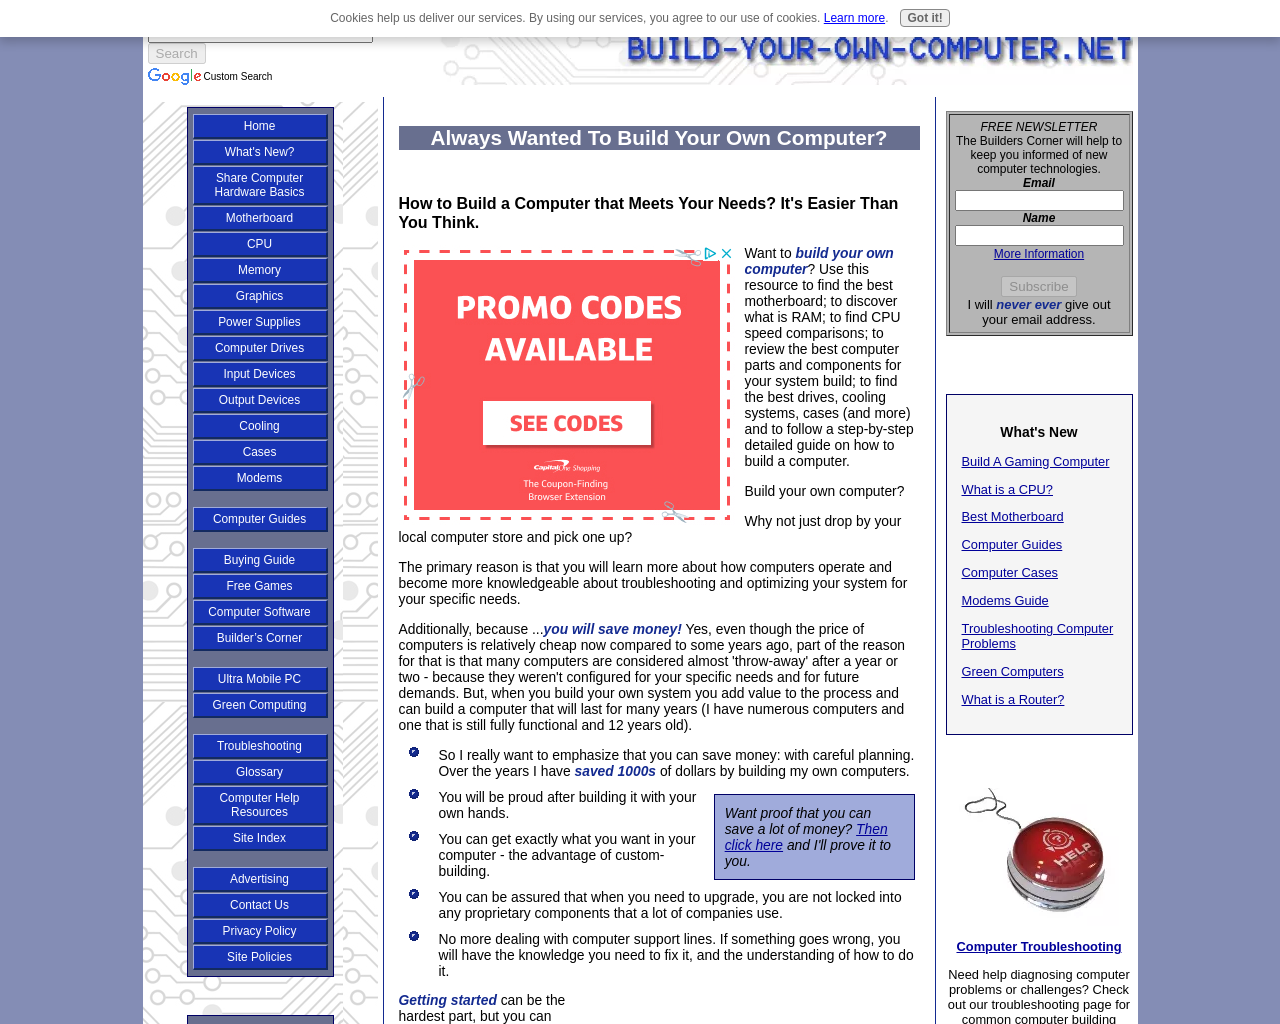 build-your-own-computer.net